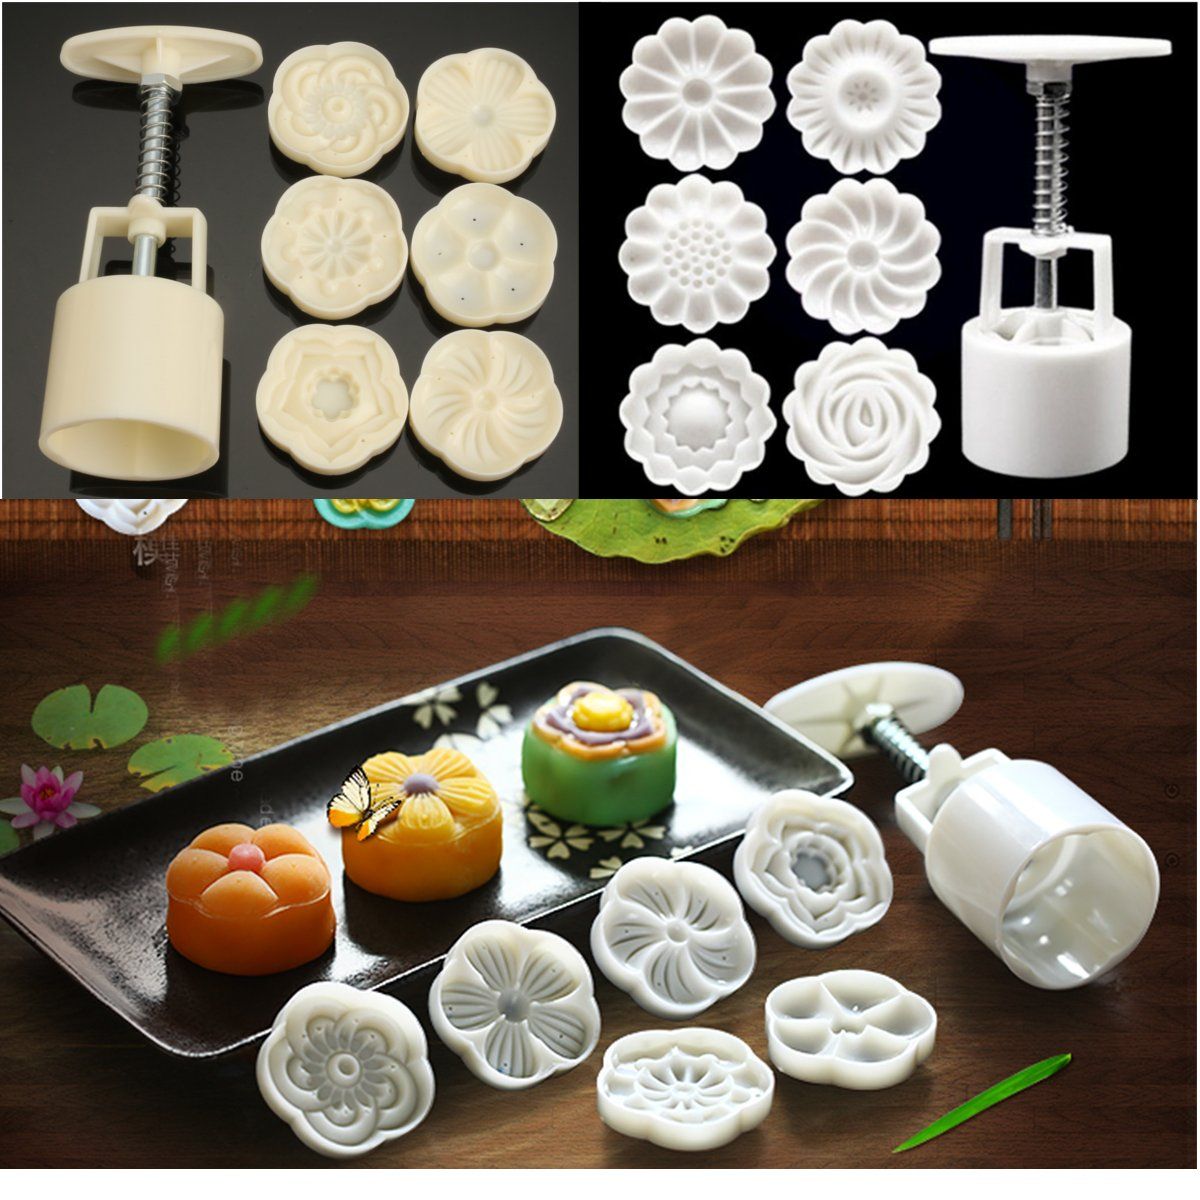 50g-6-Patterns-Moon-Cake-Mold-Round-Flower-Mould-Baking-Tool-Mid-Autumn-Festival-DIY-Decoration-1341003